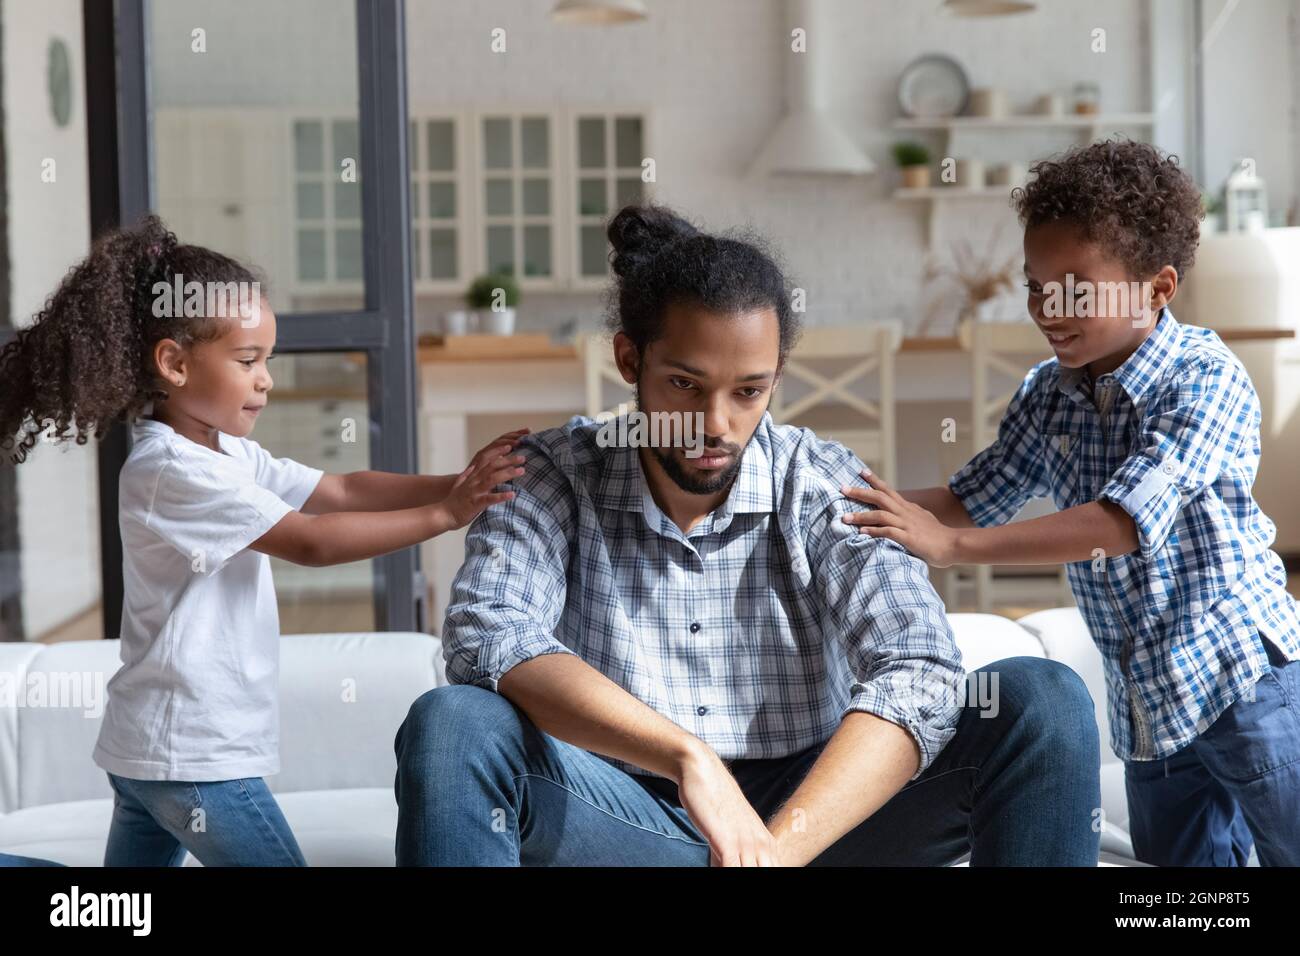 Unhappy African American father ignoring noisy children, feeling exhausted Stock Photo